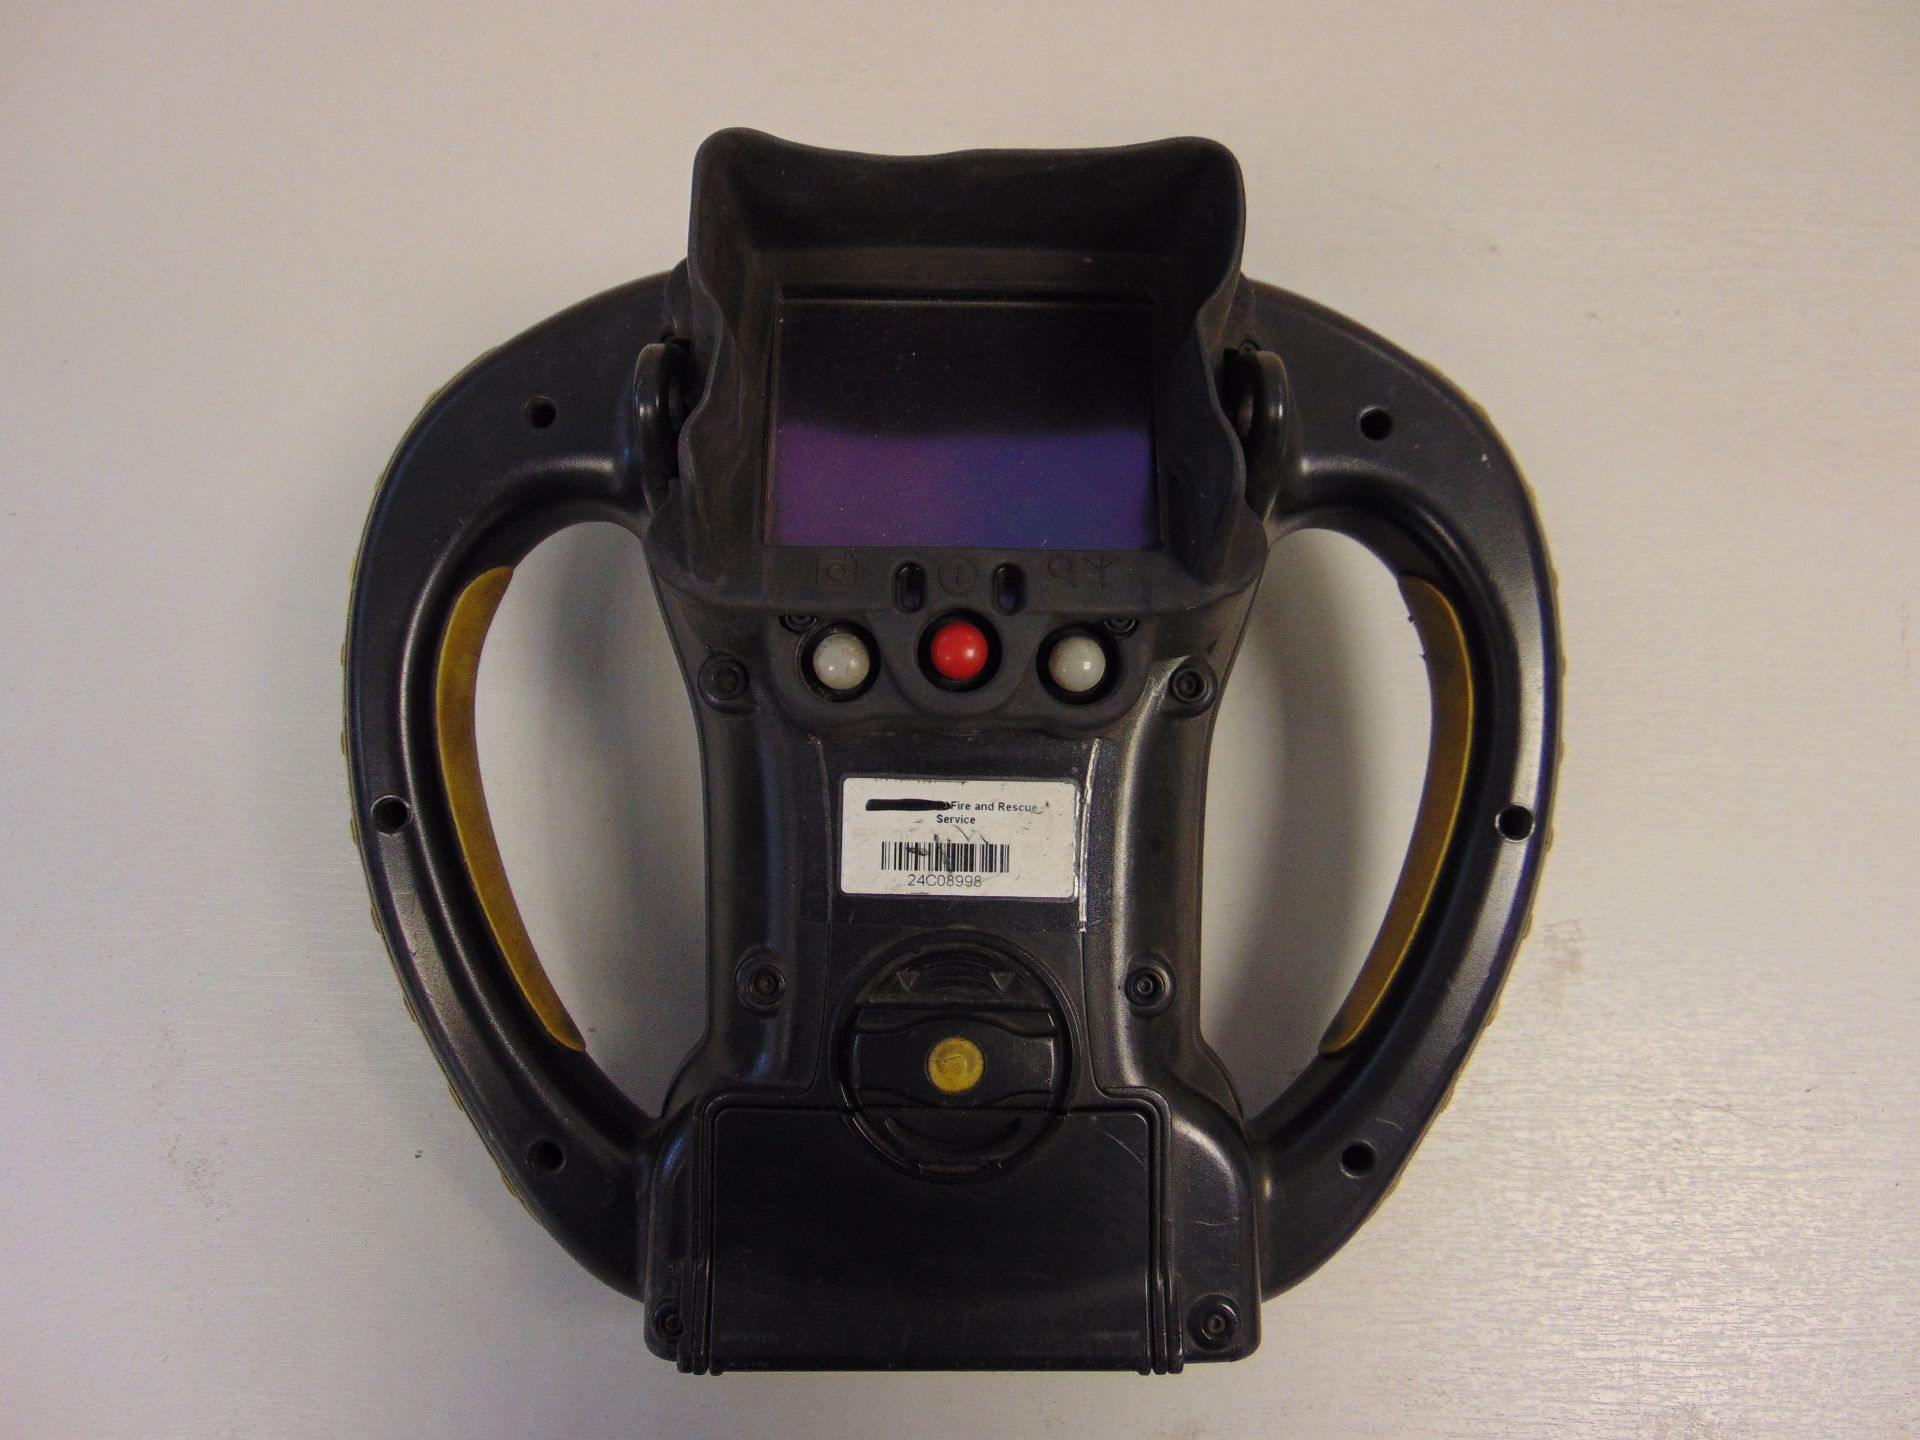 Argus 3 E2V Thermal Imaging Camera w/ Battery & Charger - Image 4 of 6